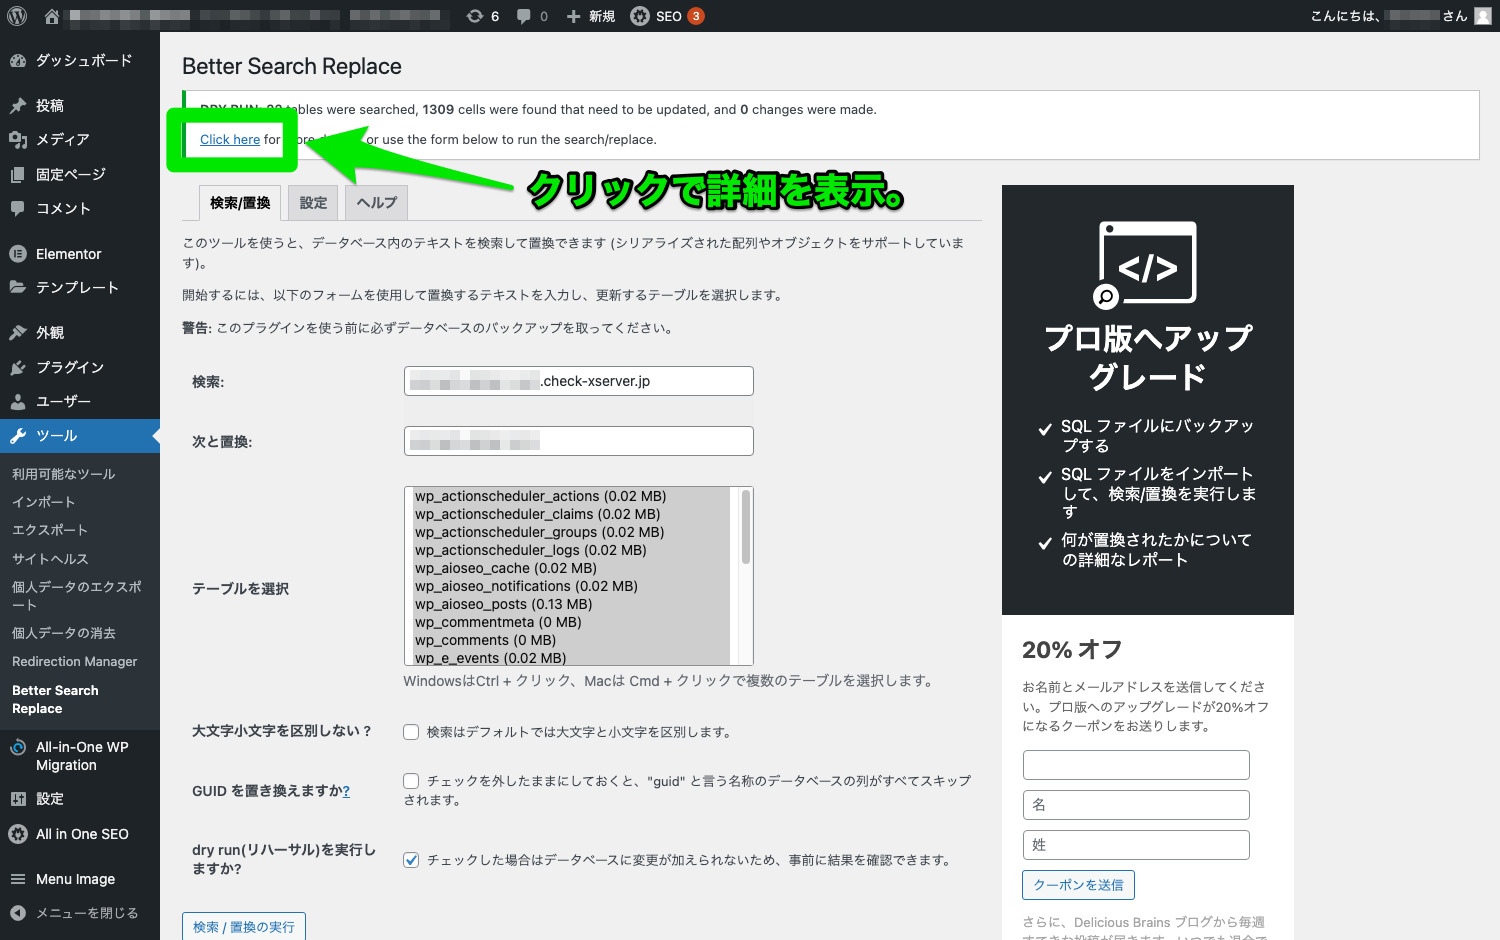 「Better Search Replace」のリハーサル実行-1